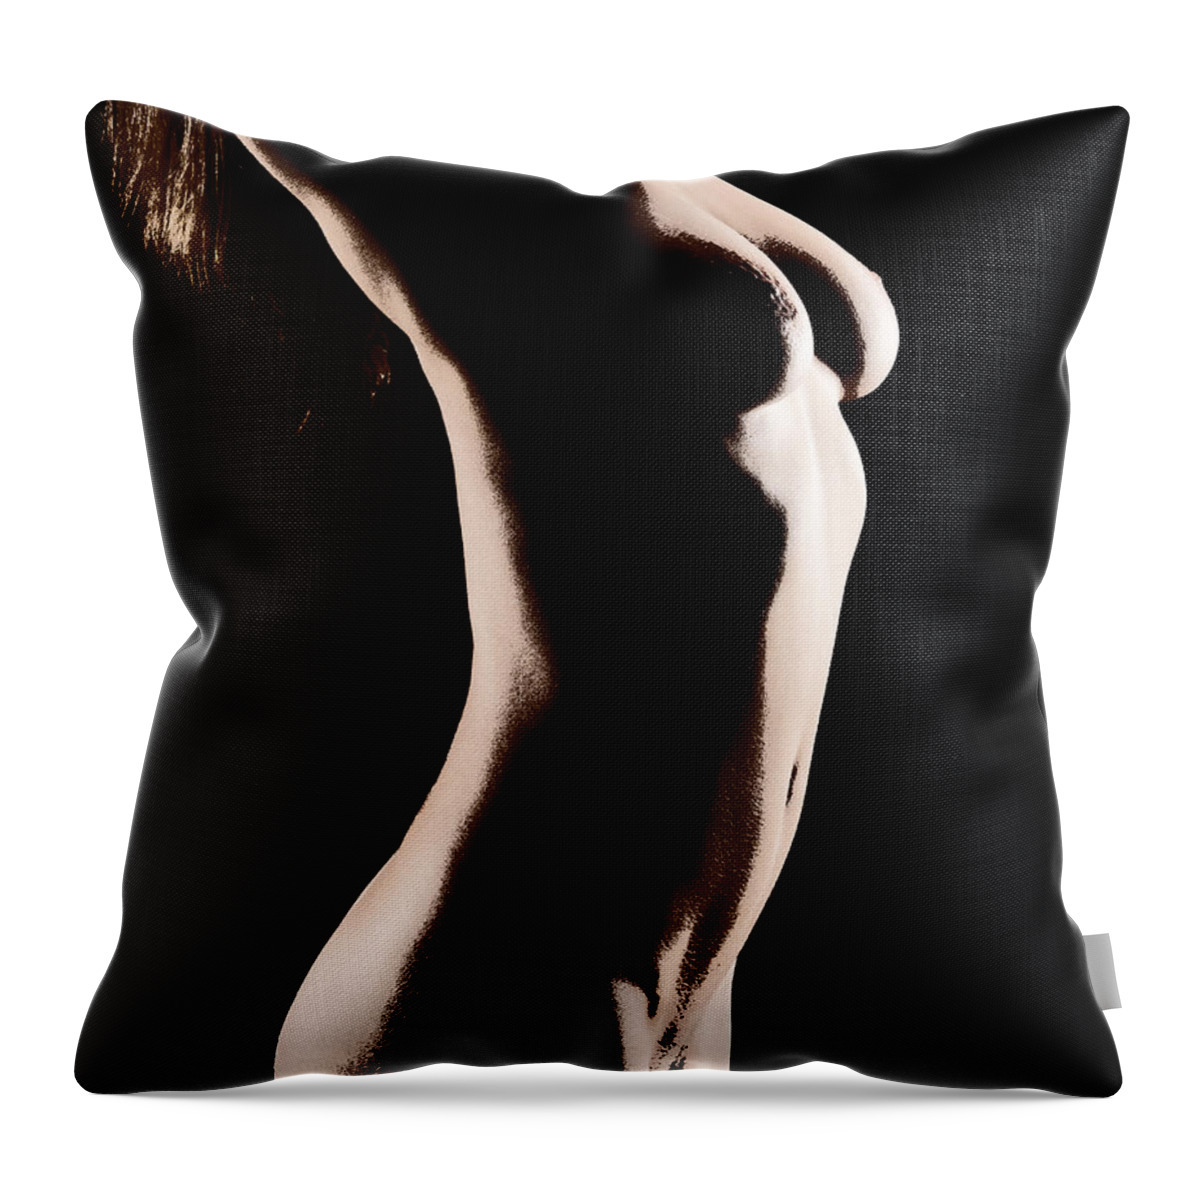 Nude Throw Pillow featuring the photograph Bodyscape 542 by Michael Fryd